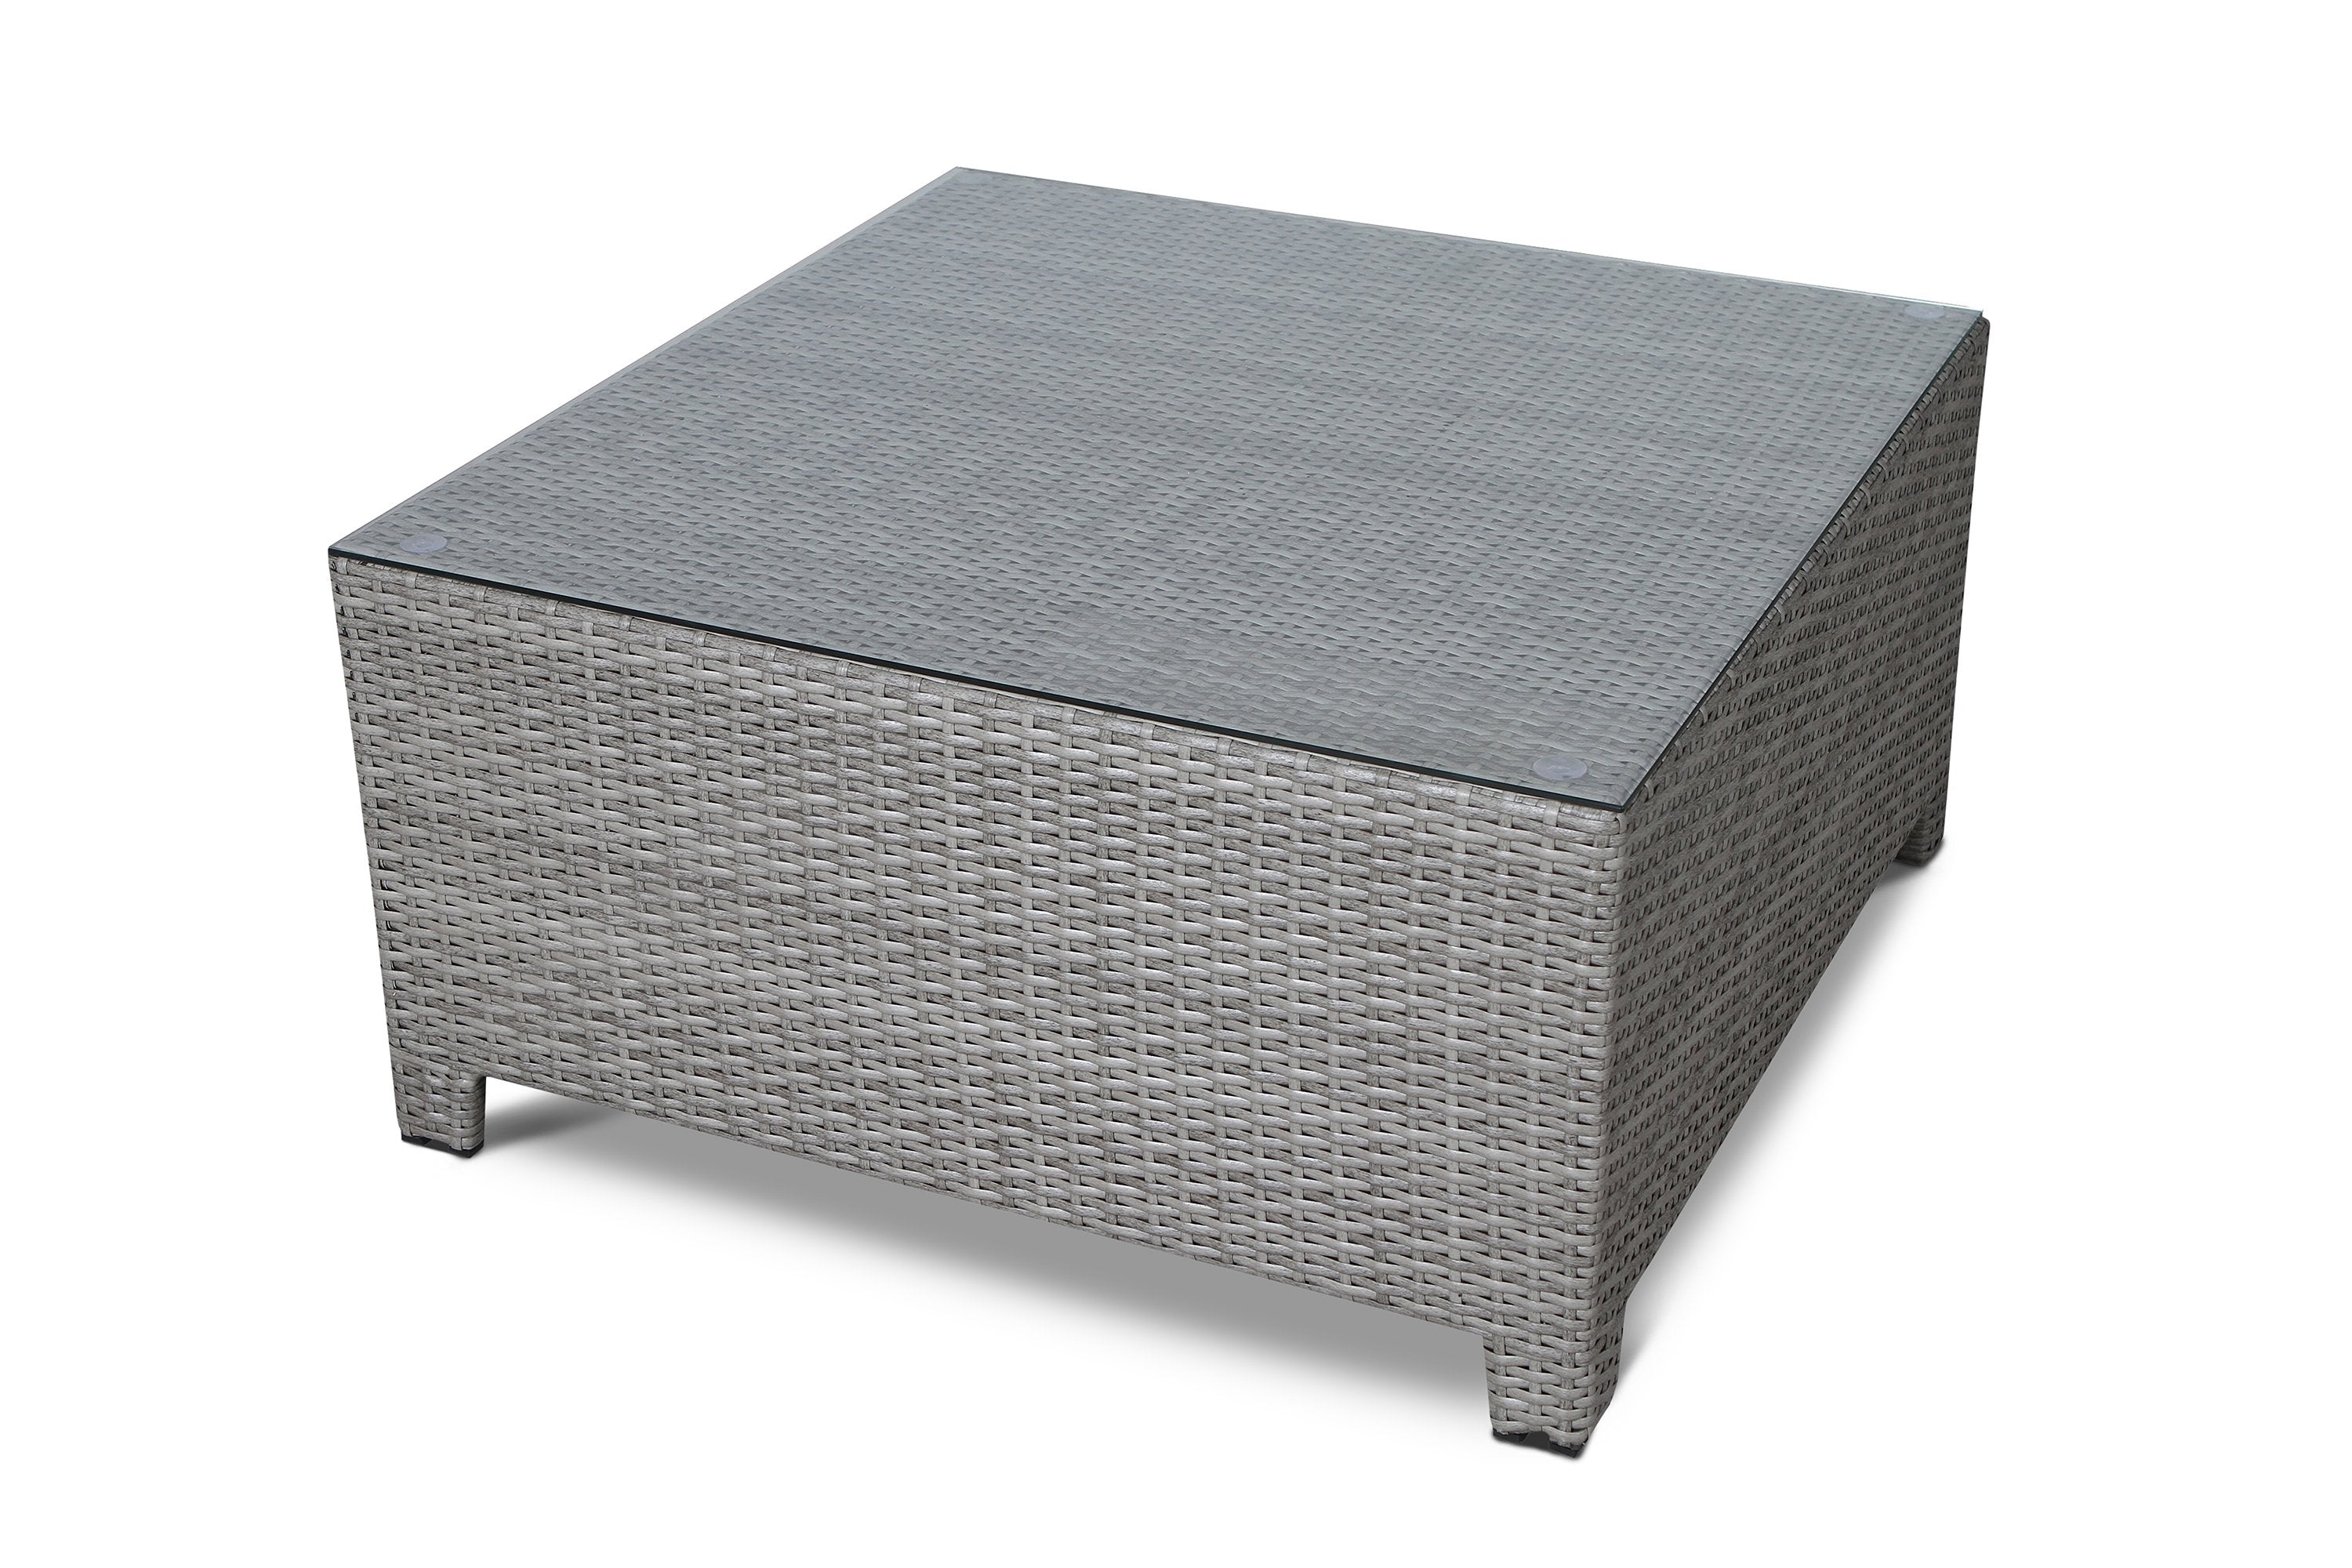 Stamford Outdoor Wicker Coffee Table